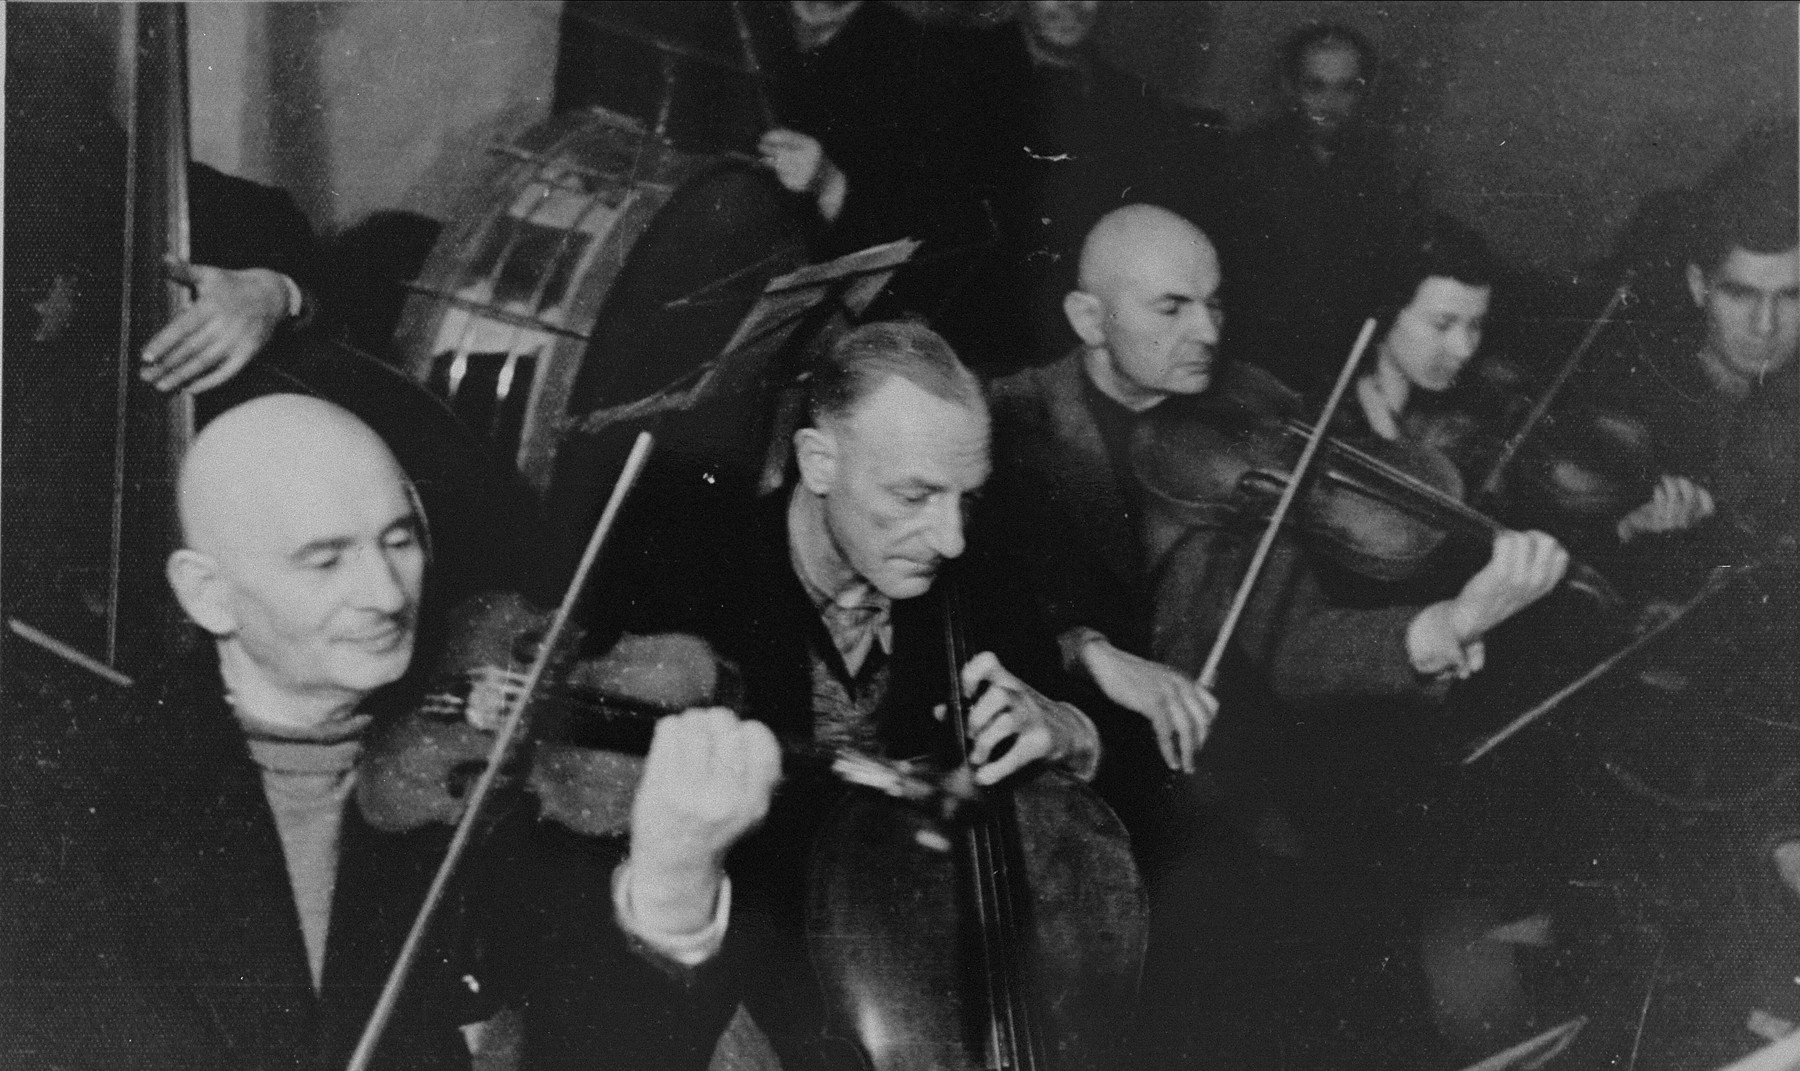 Performance of the Kovno ghetto orchestra.  

Among those pictured are: Mordechai Borstein (left), Korijski (middle), and Maya Gladstein (right).  Bornstein and Gladstein both survived and moved to Israel, while Korijski perished.